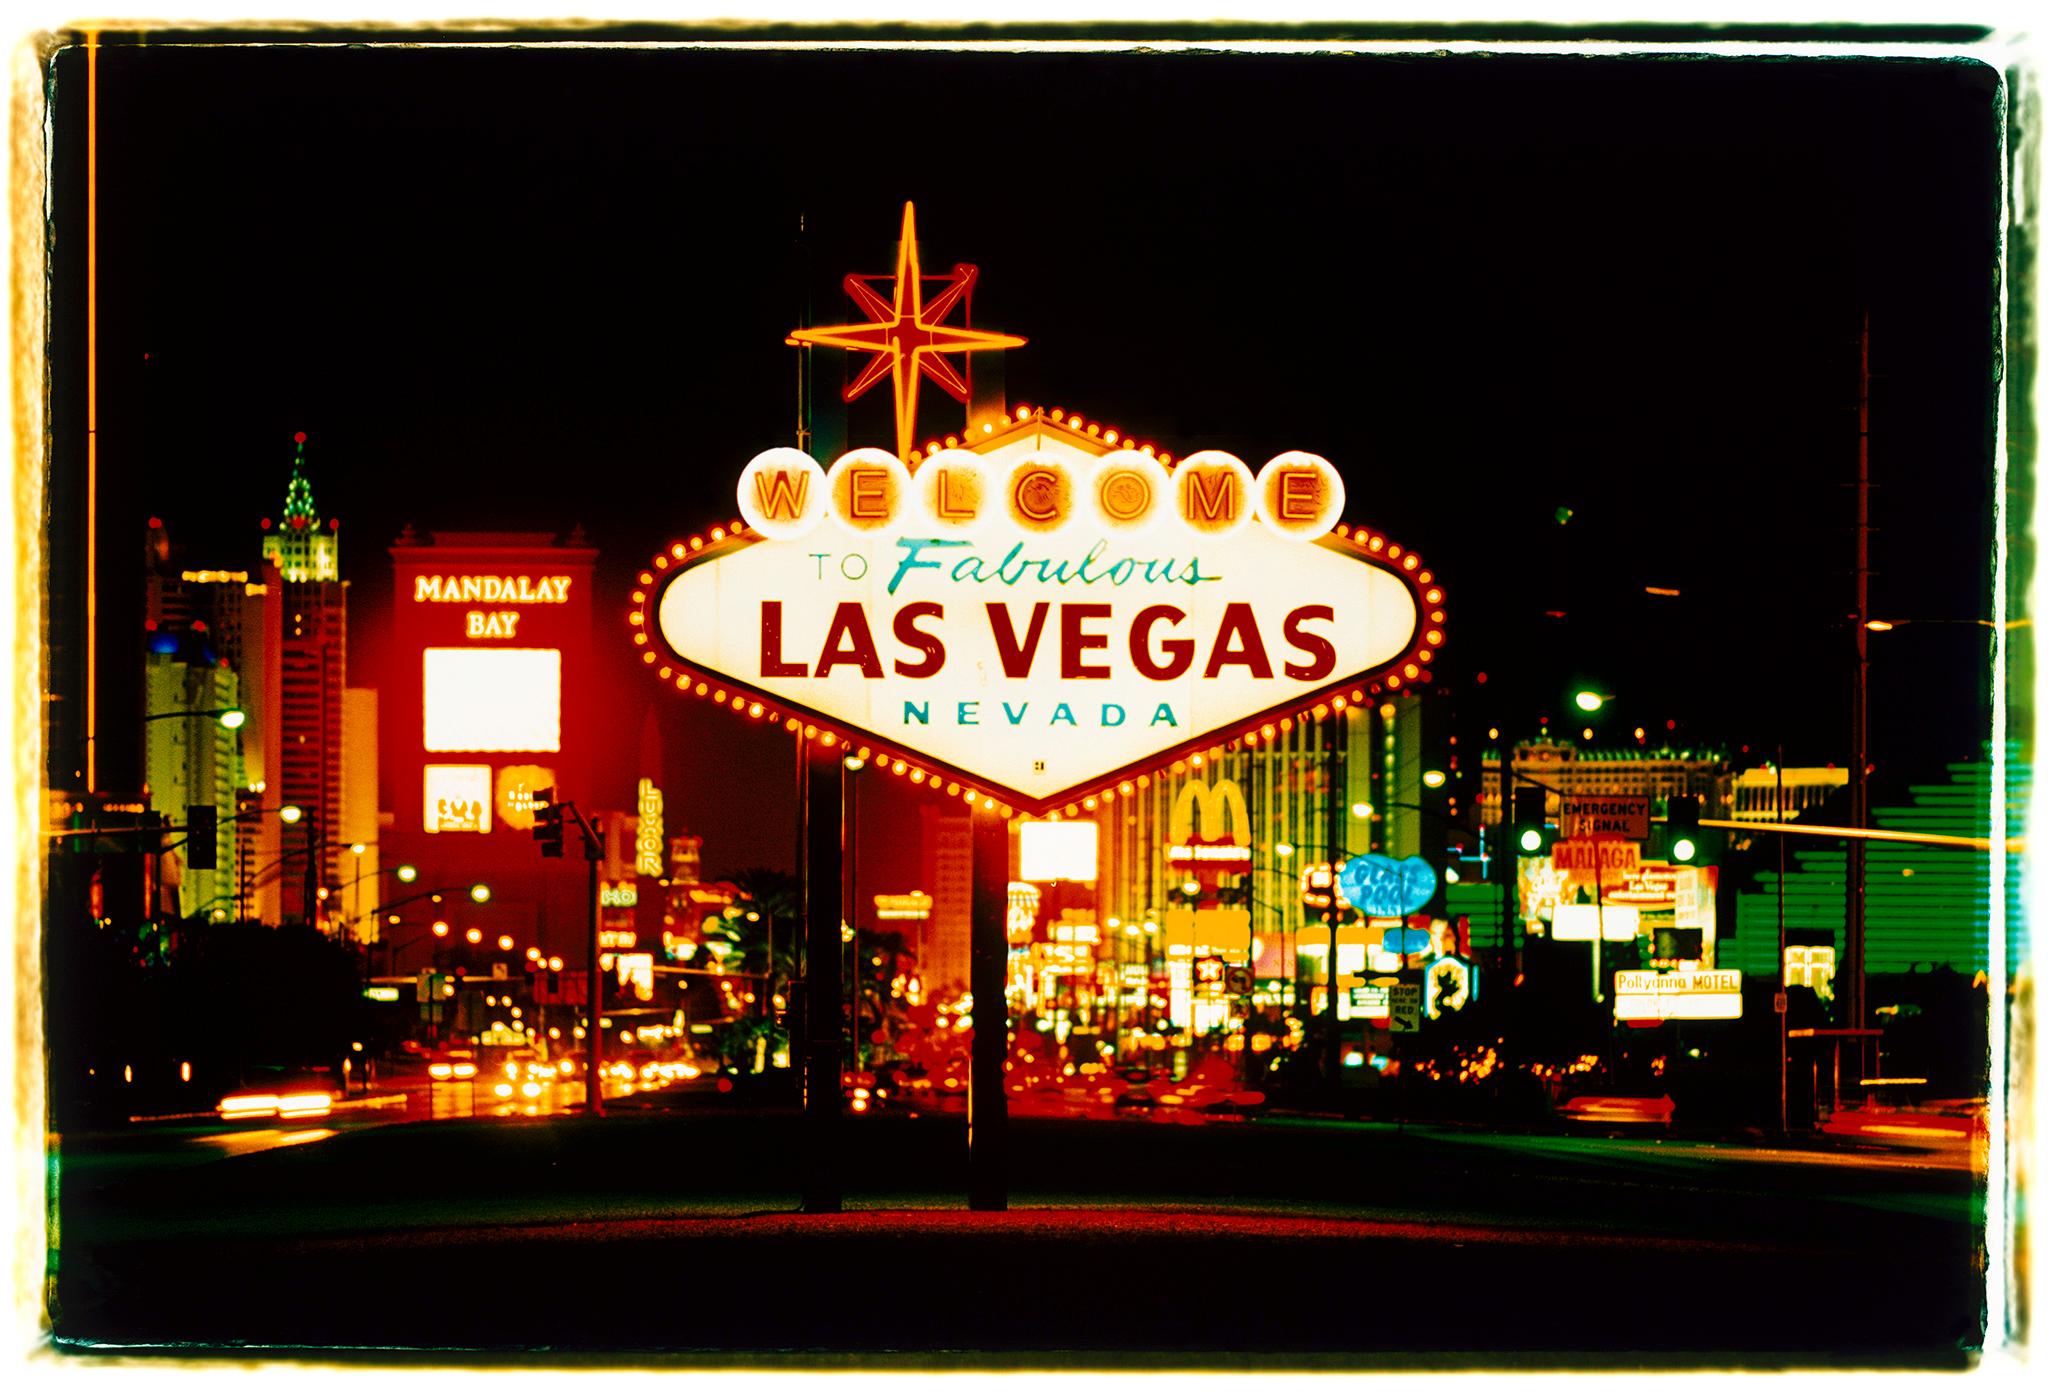 Arriving and Leaving, Las Vegas, Two Framed American Color Pop Art Photograph - Print by Richard Heeps